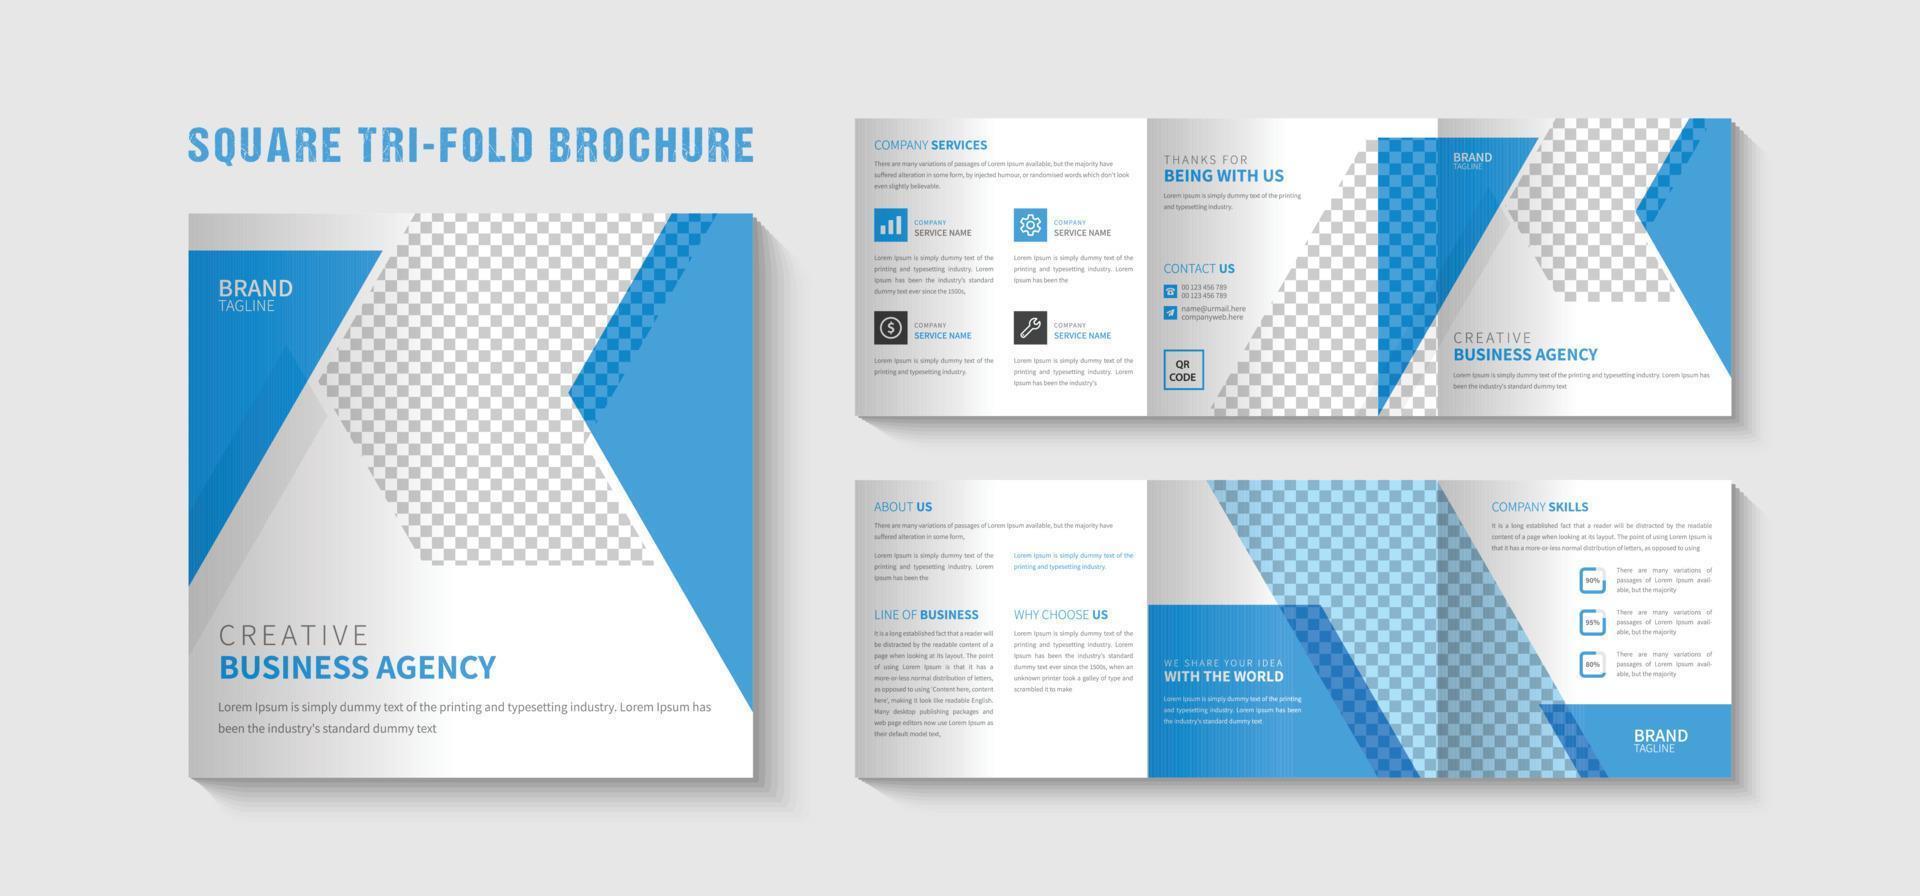 Creative and Modern Square Trifold Brochure Template vector